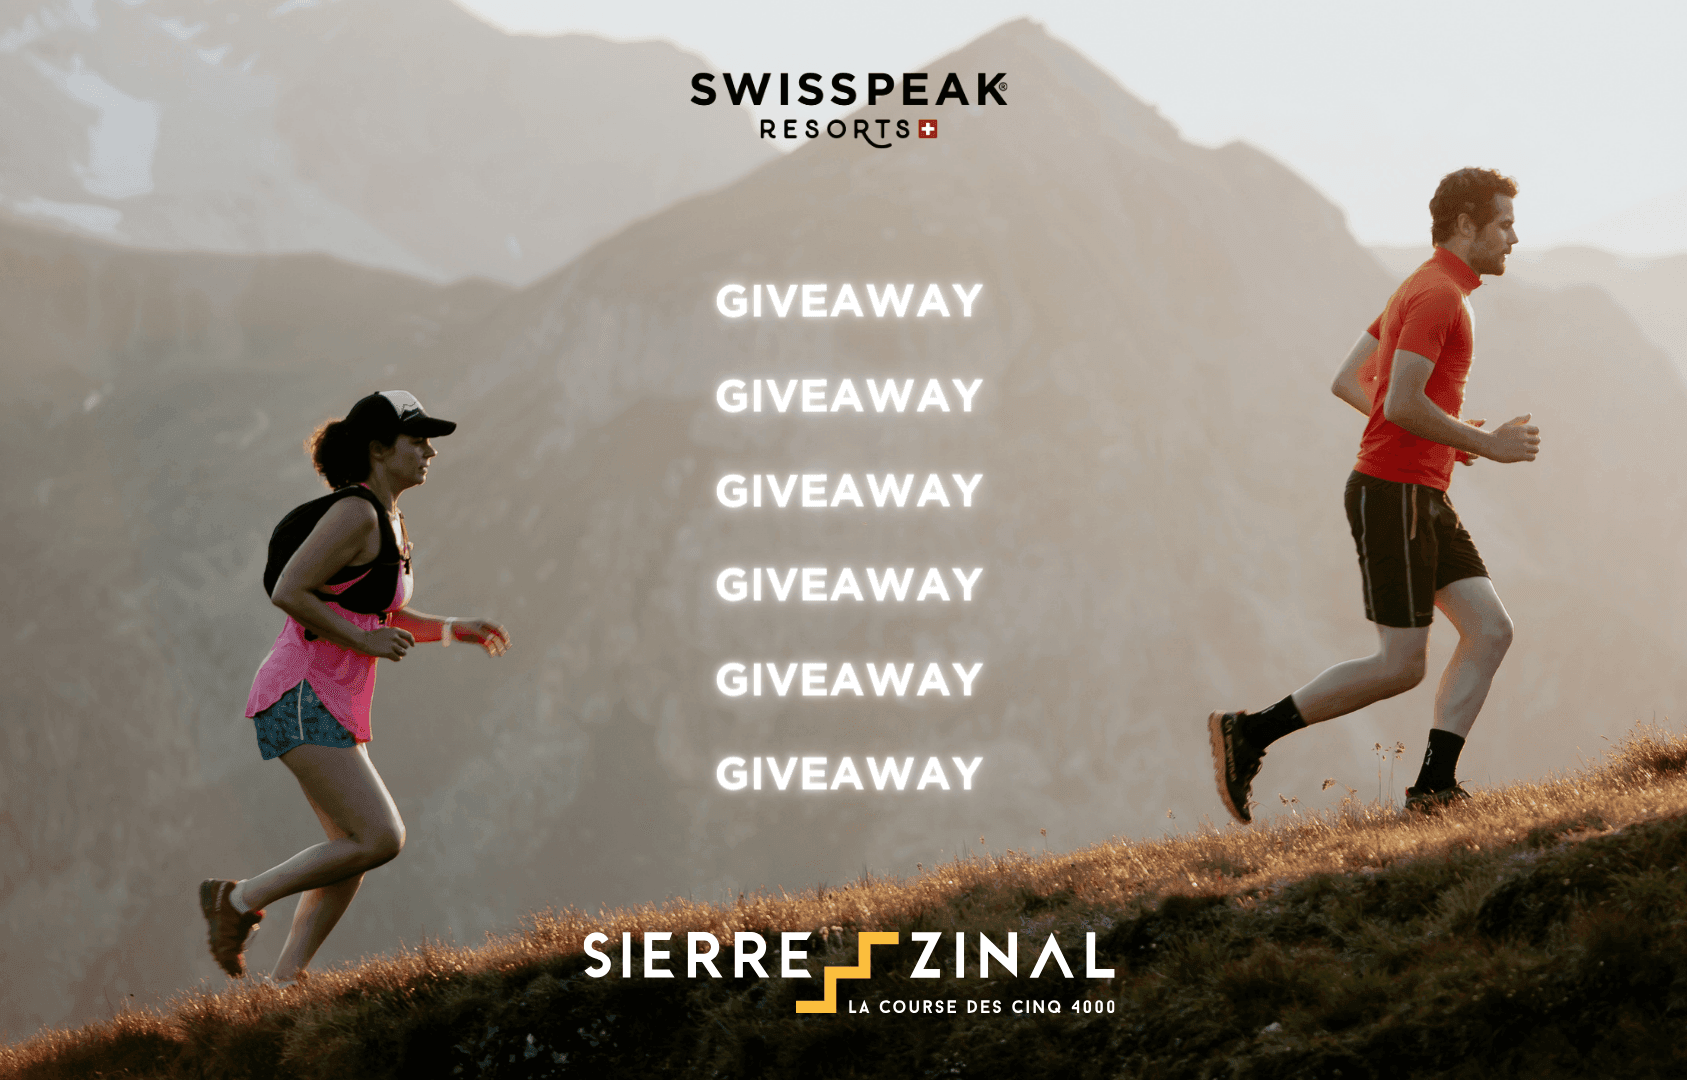 COMPETITION - Win 1 bib for the Sierre - Zinal race!